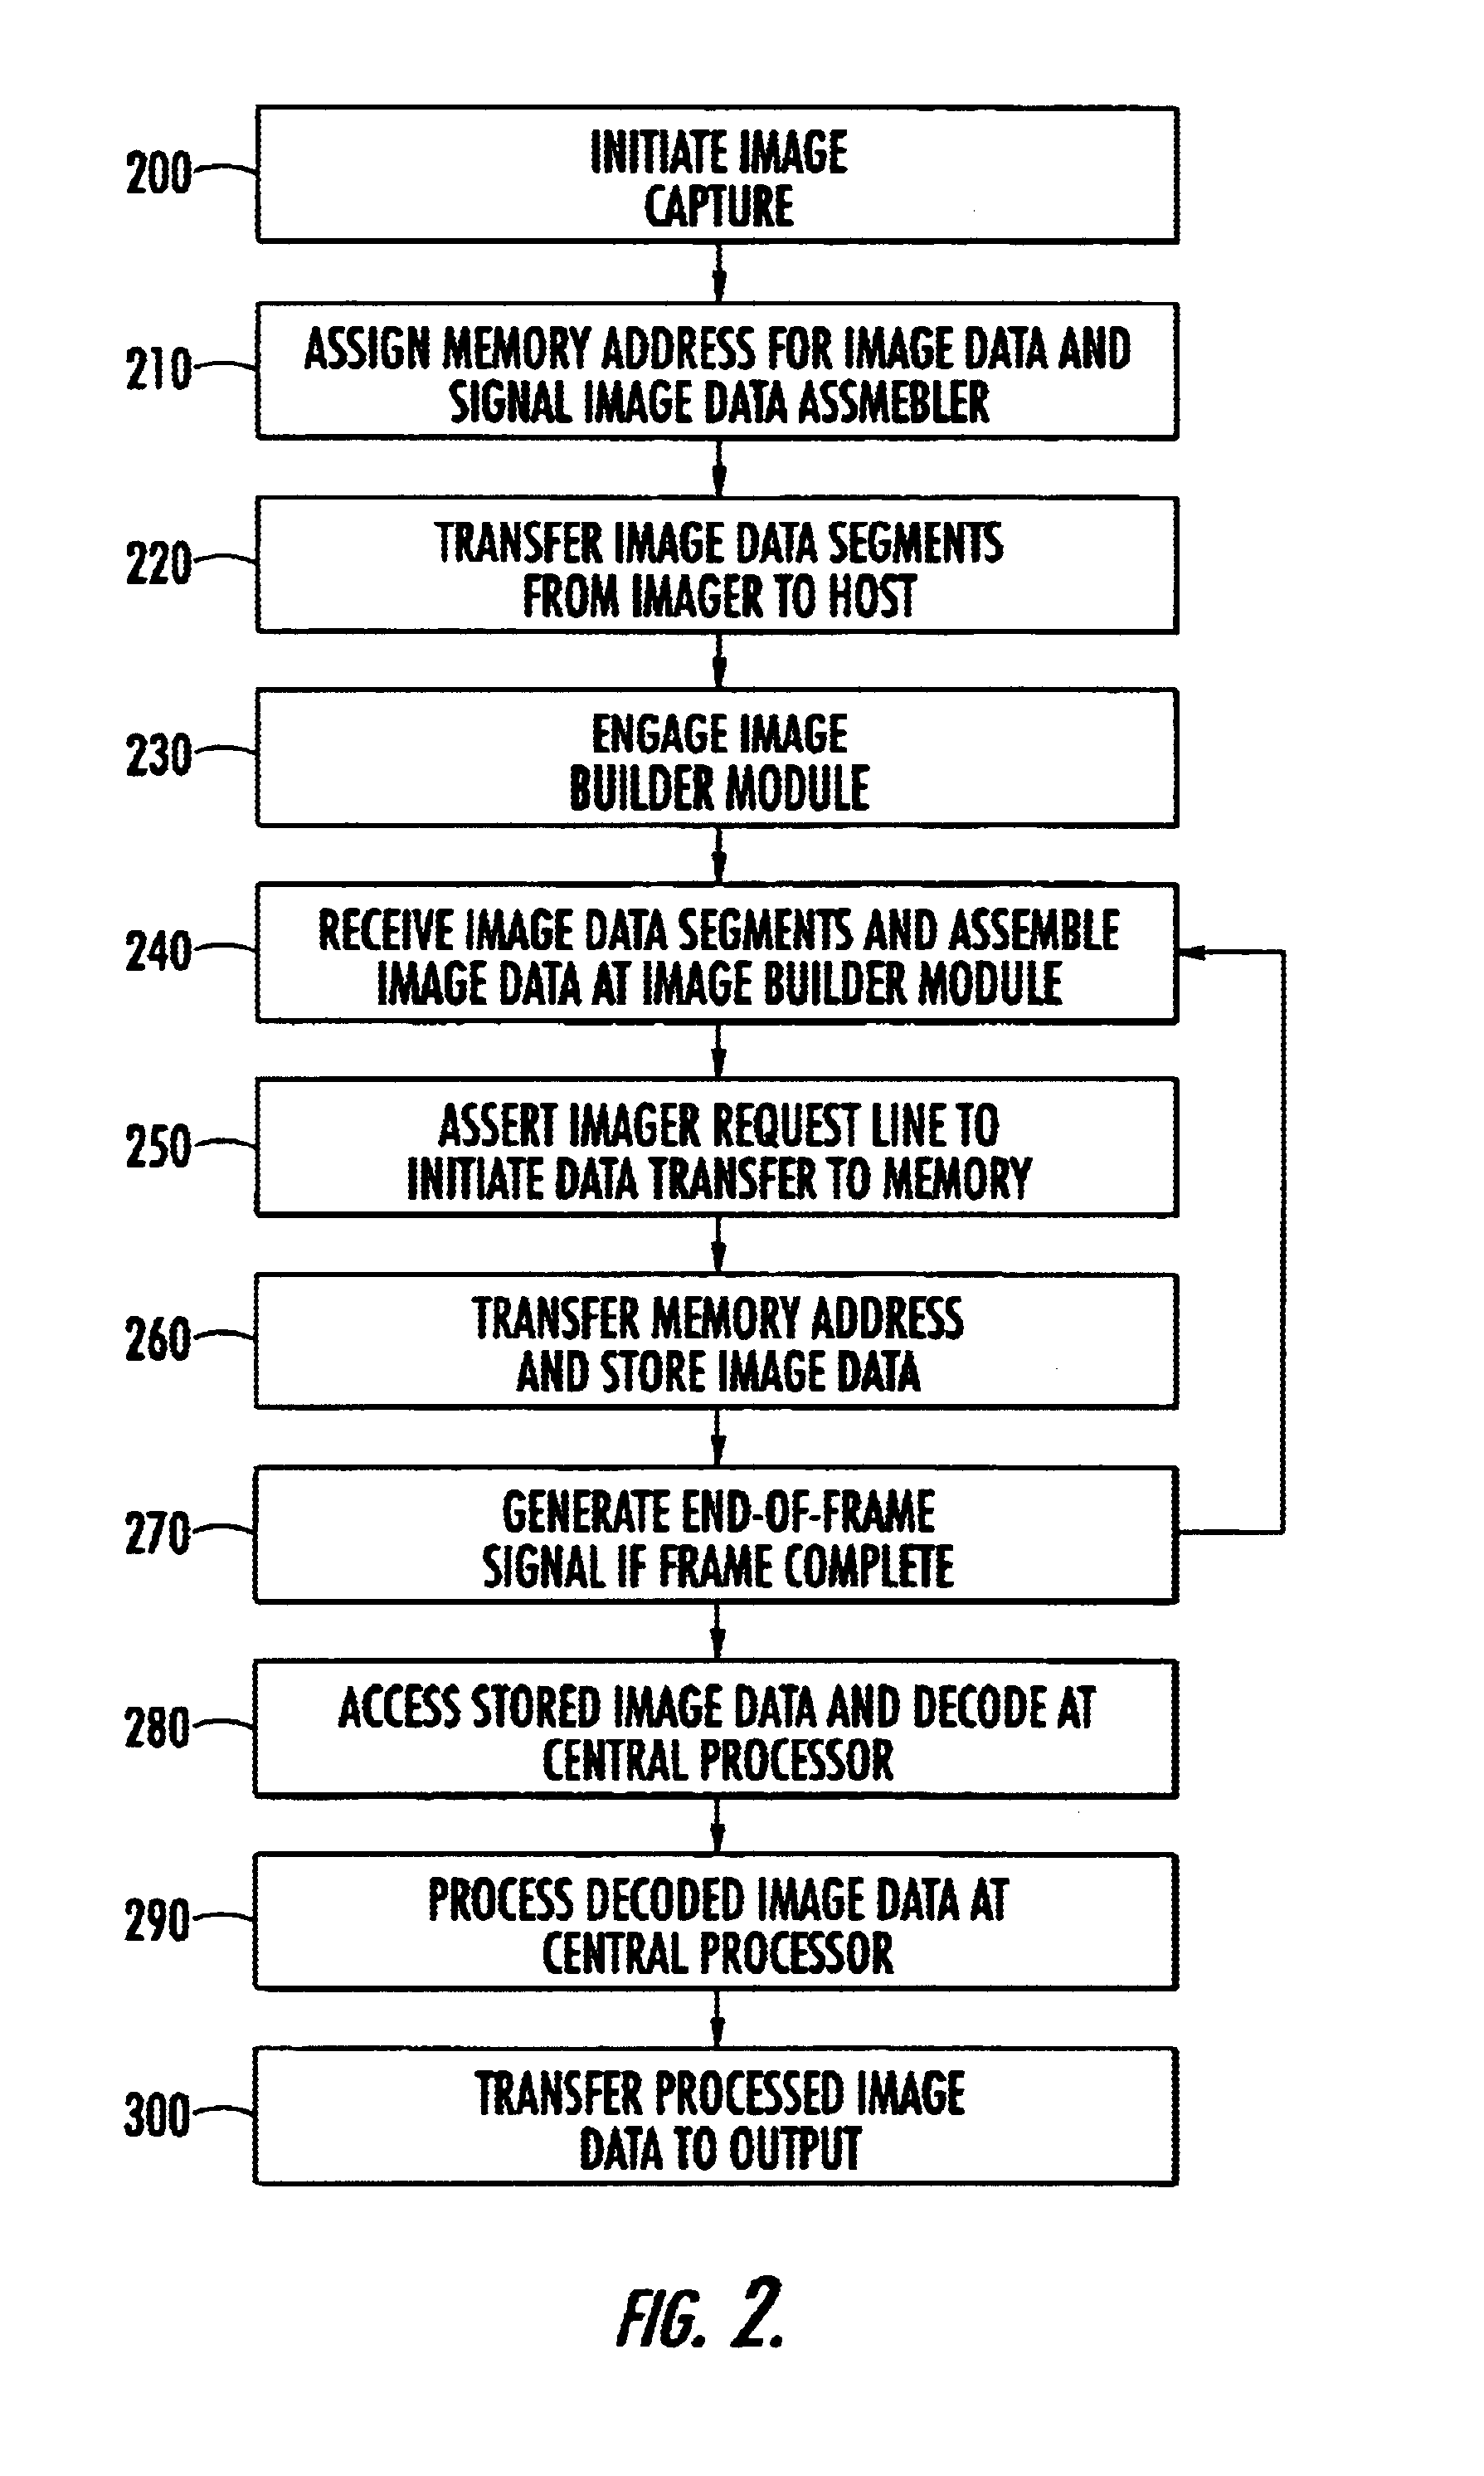 Methods and apparatus for image capture and decoding in a centralized processing unit